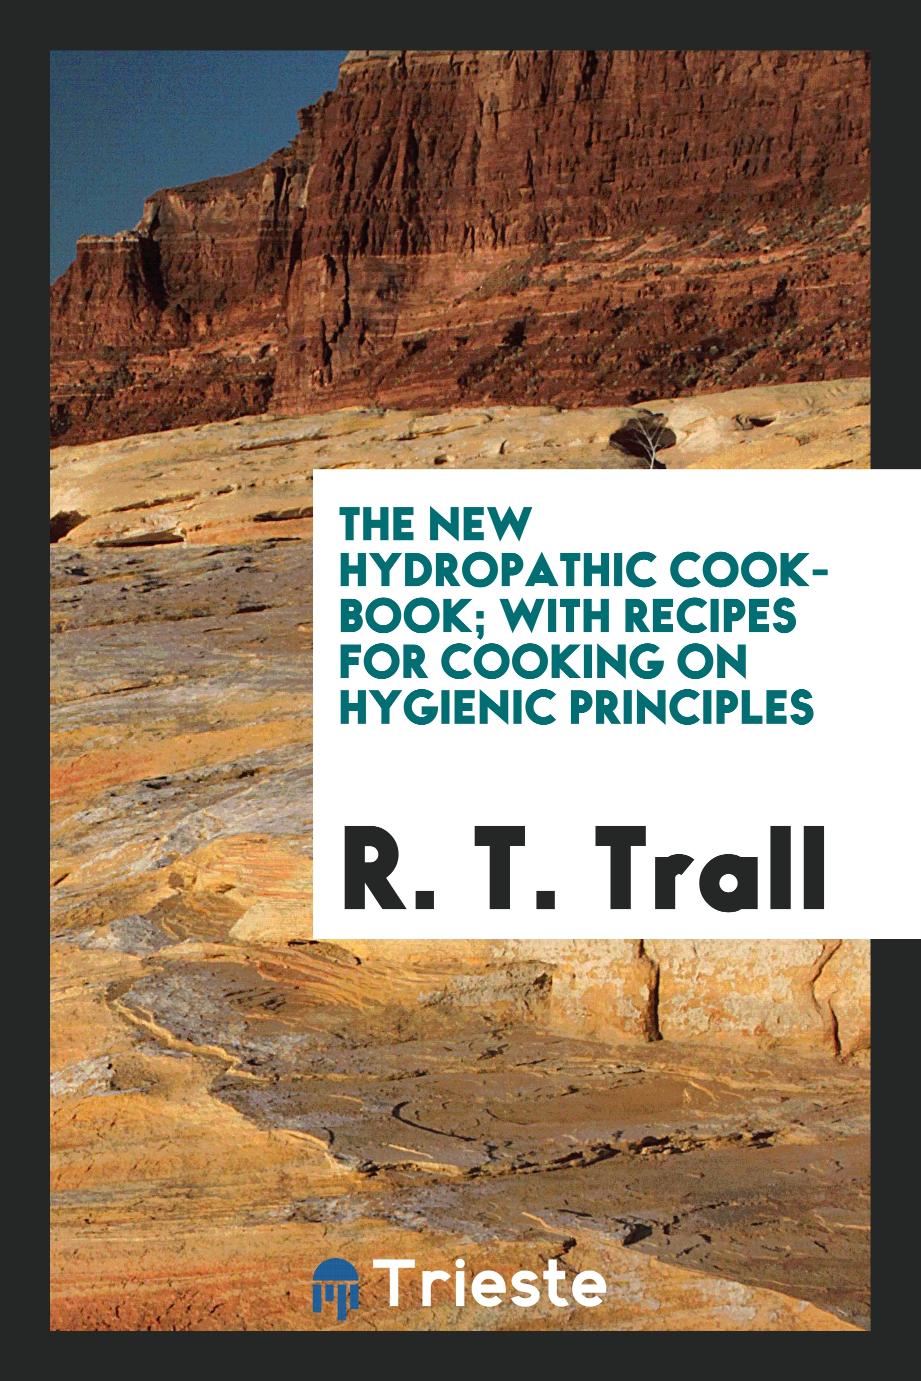 The New Hydropathic Cook-Book; With Recipes for Cooking on Hygienic Principles